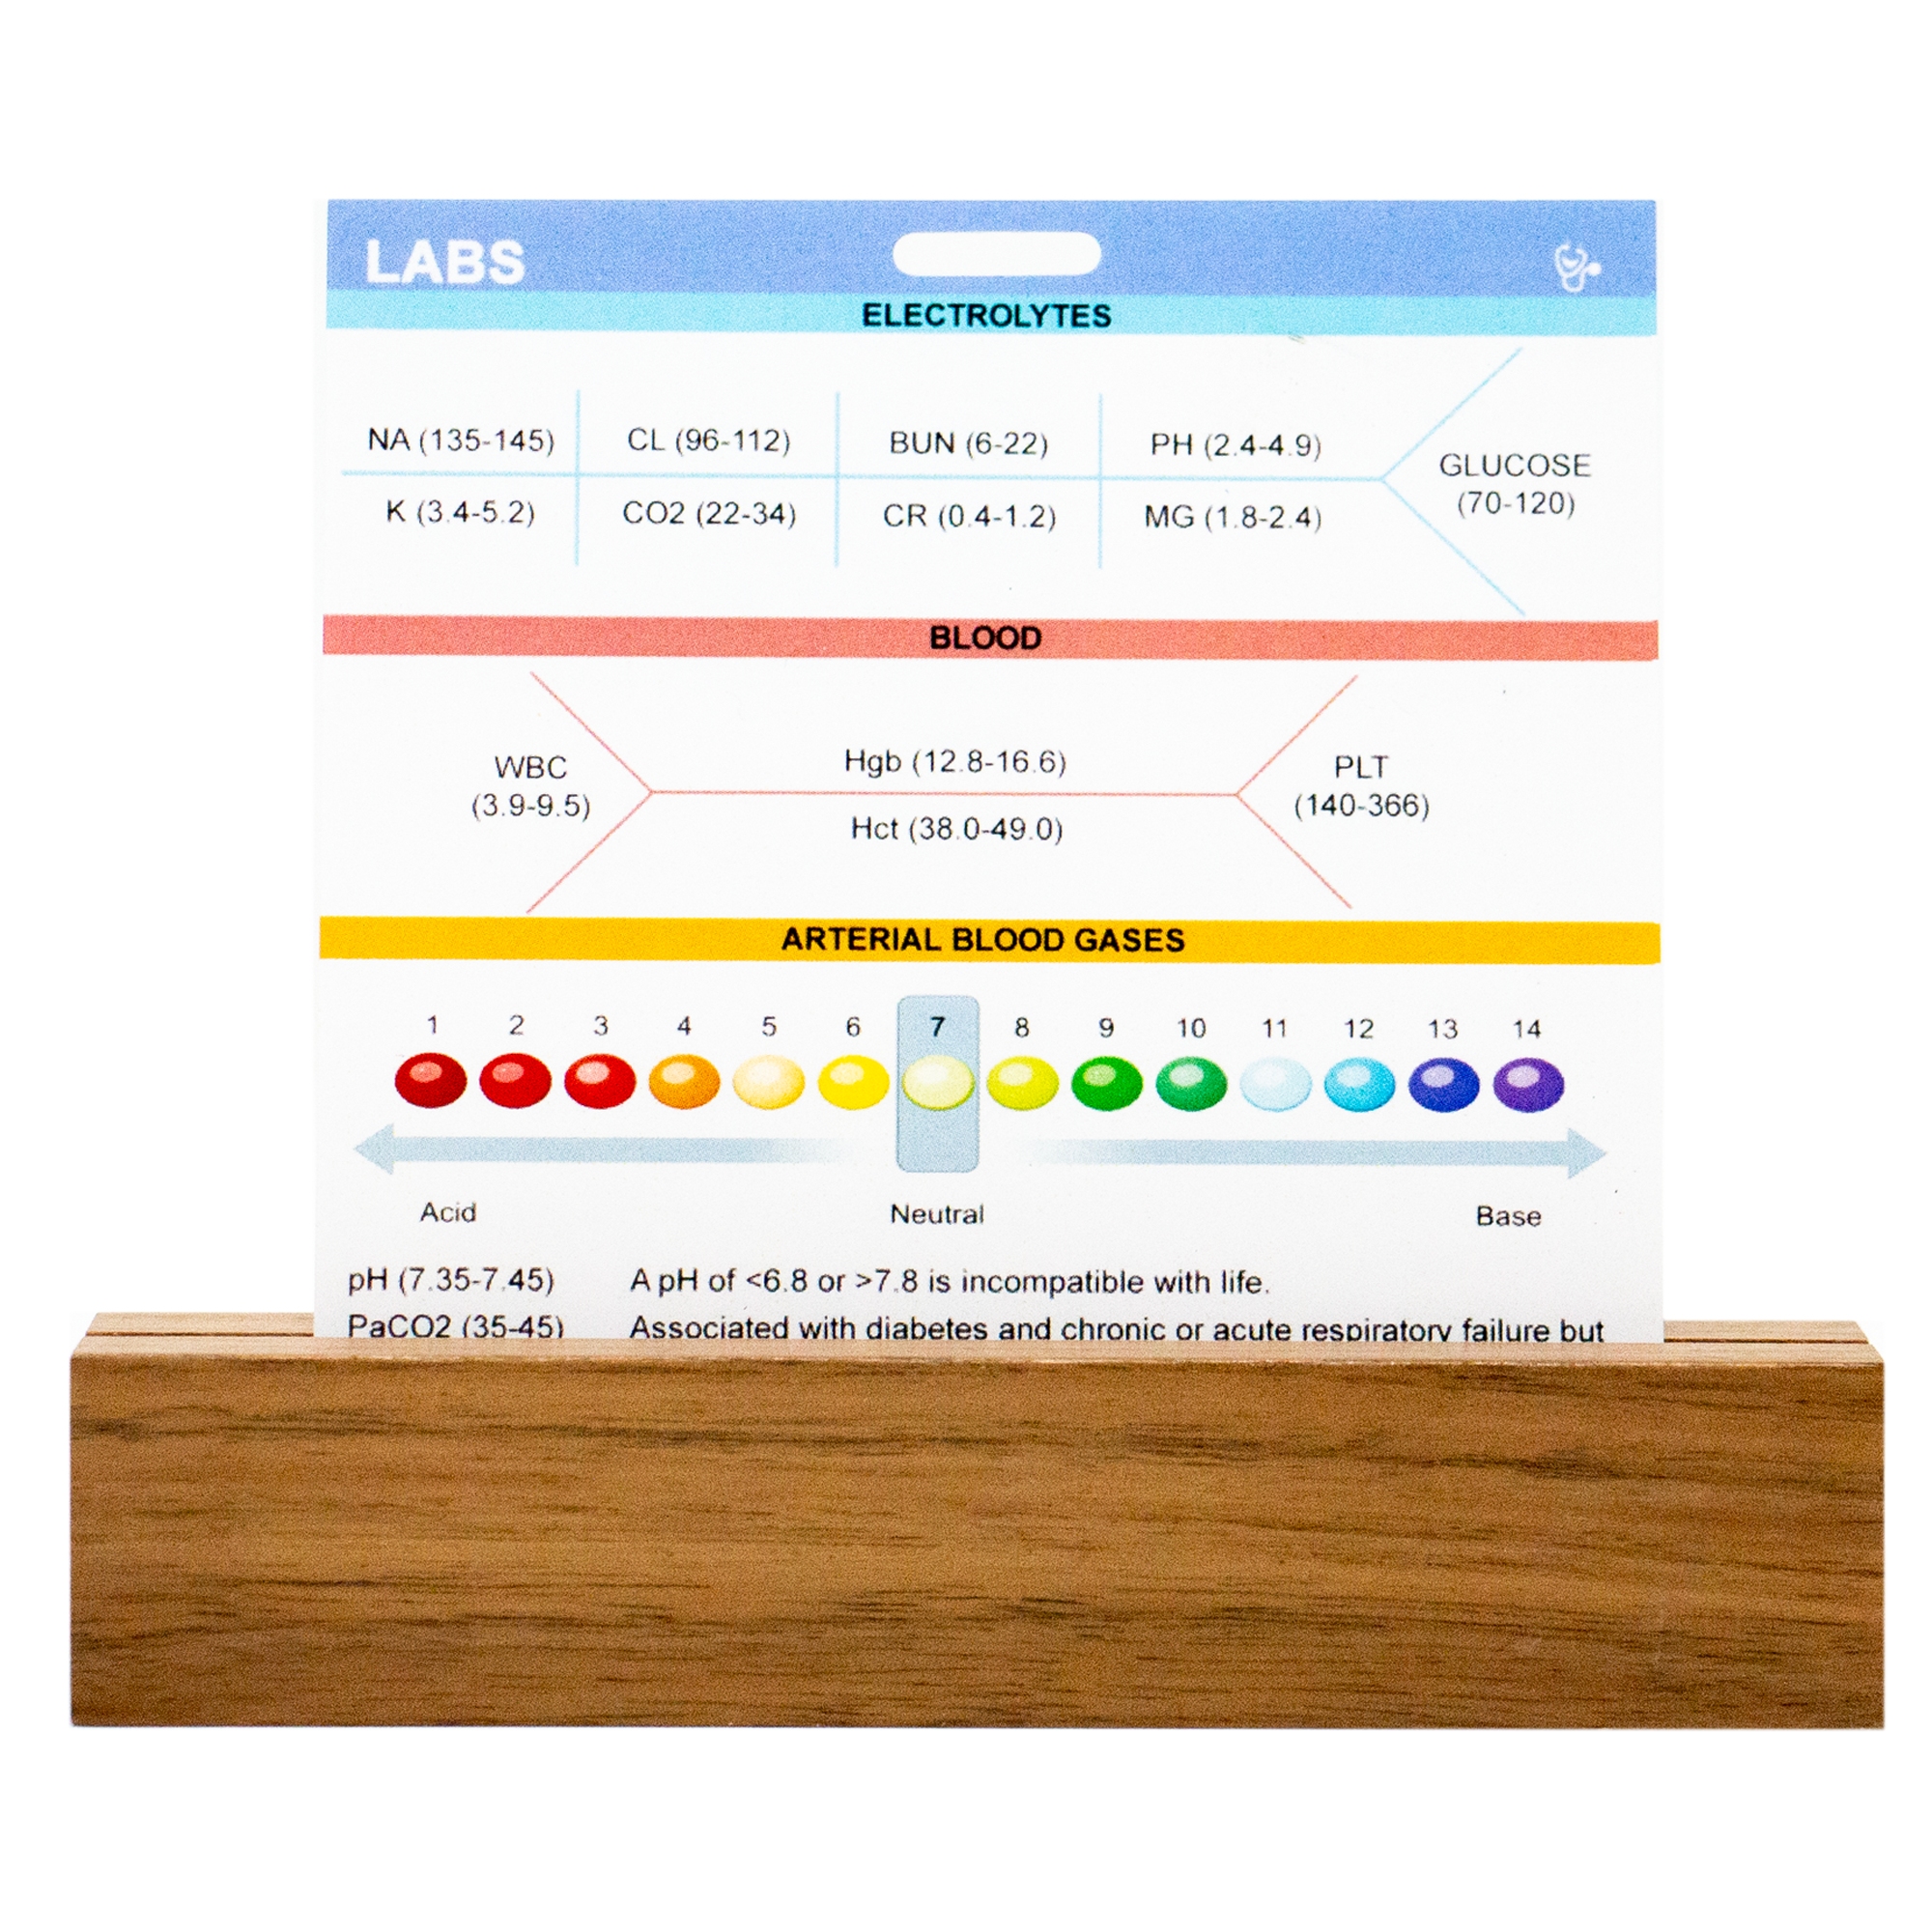 Side one of our Lab Values Badge buddy contain Electrolytes, Blood and Arterial Blood Gases.